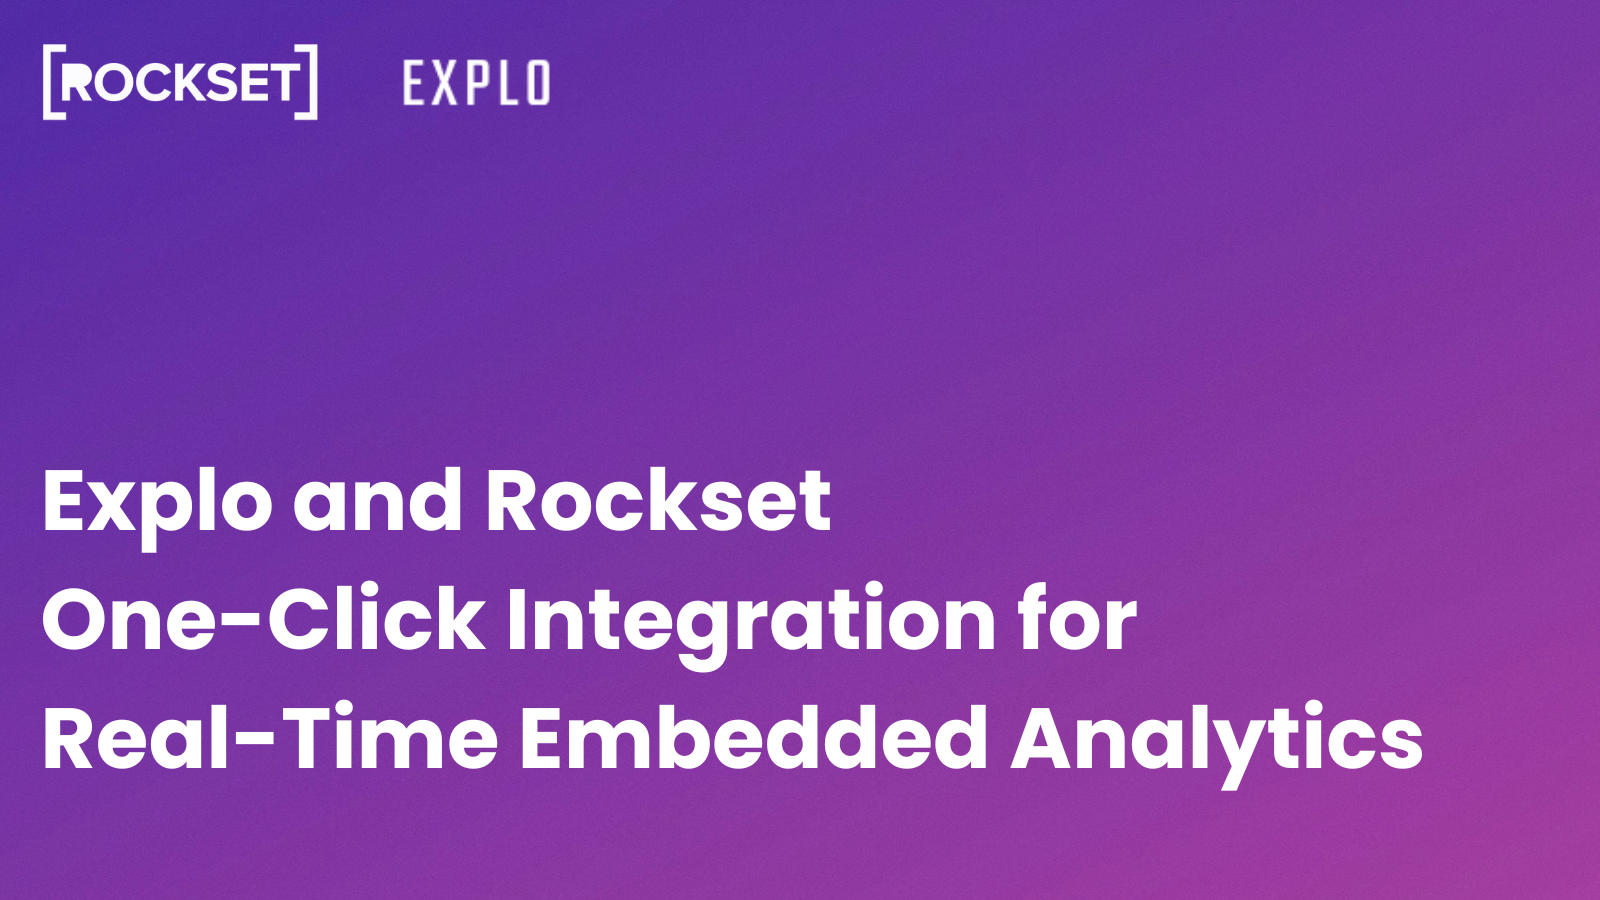 Explo and Rockset One-Click Integration for Real-Time Embedded Analytics